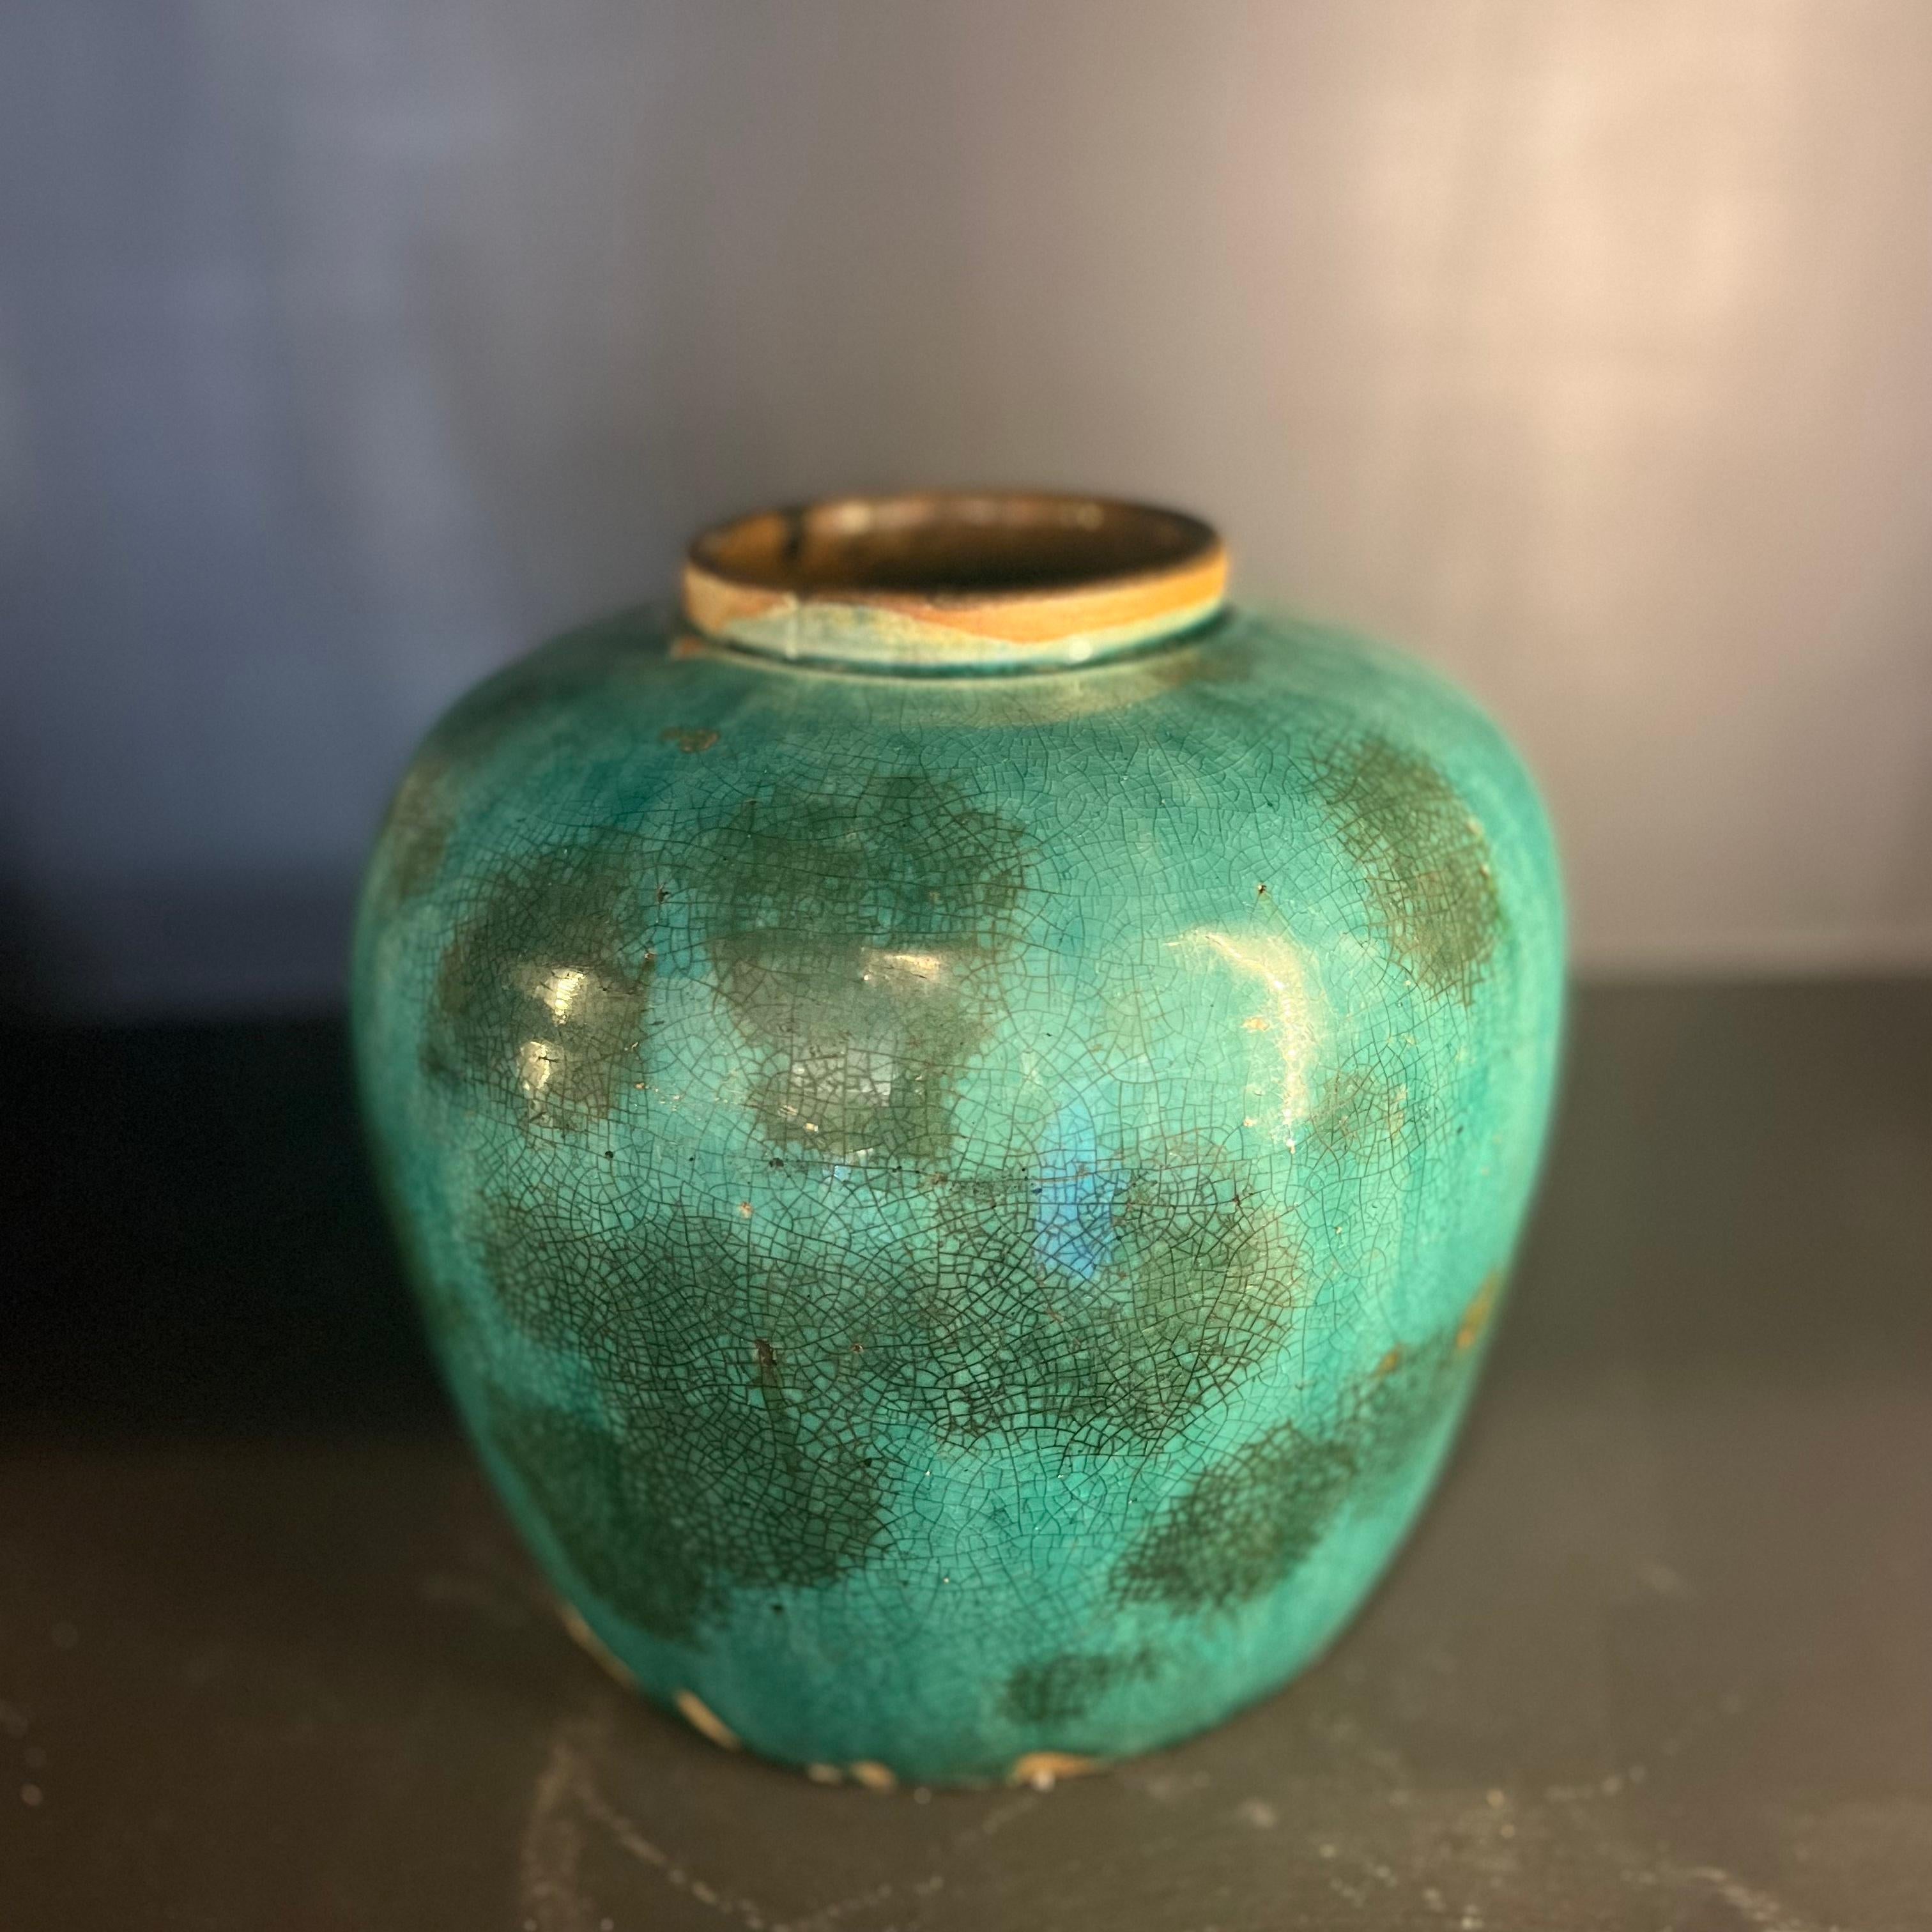 Ceramic stoneware pot with a crackled green glaze, hailing from mid-18th century China. The color quality here is fabulous—the juiciest, most pellucid marine blue-green, with soft washes of a darker hue dotting the surface in an irregular pattern.